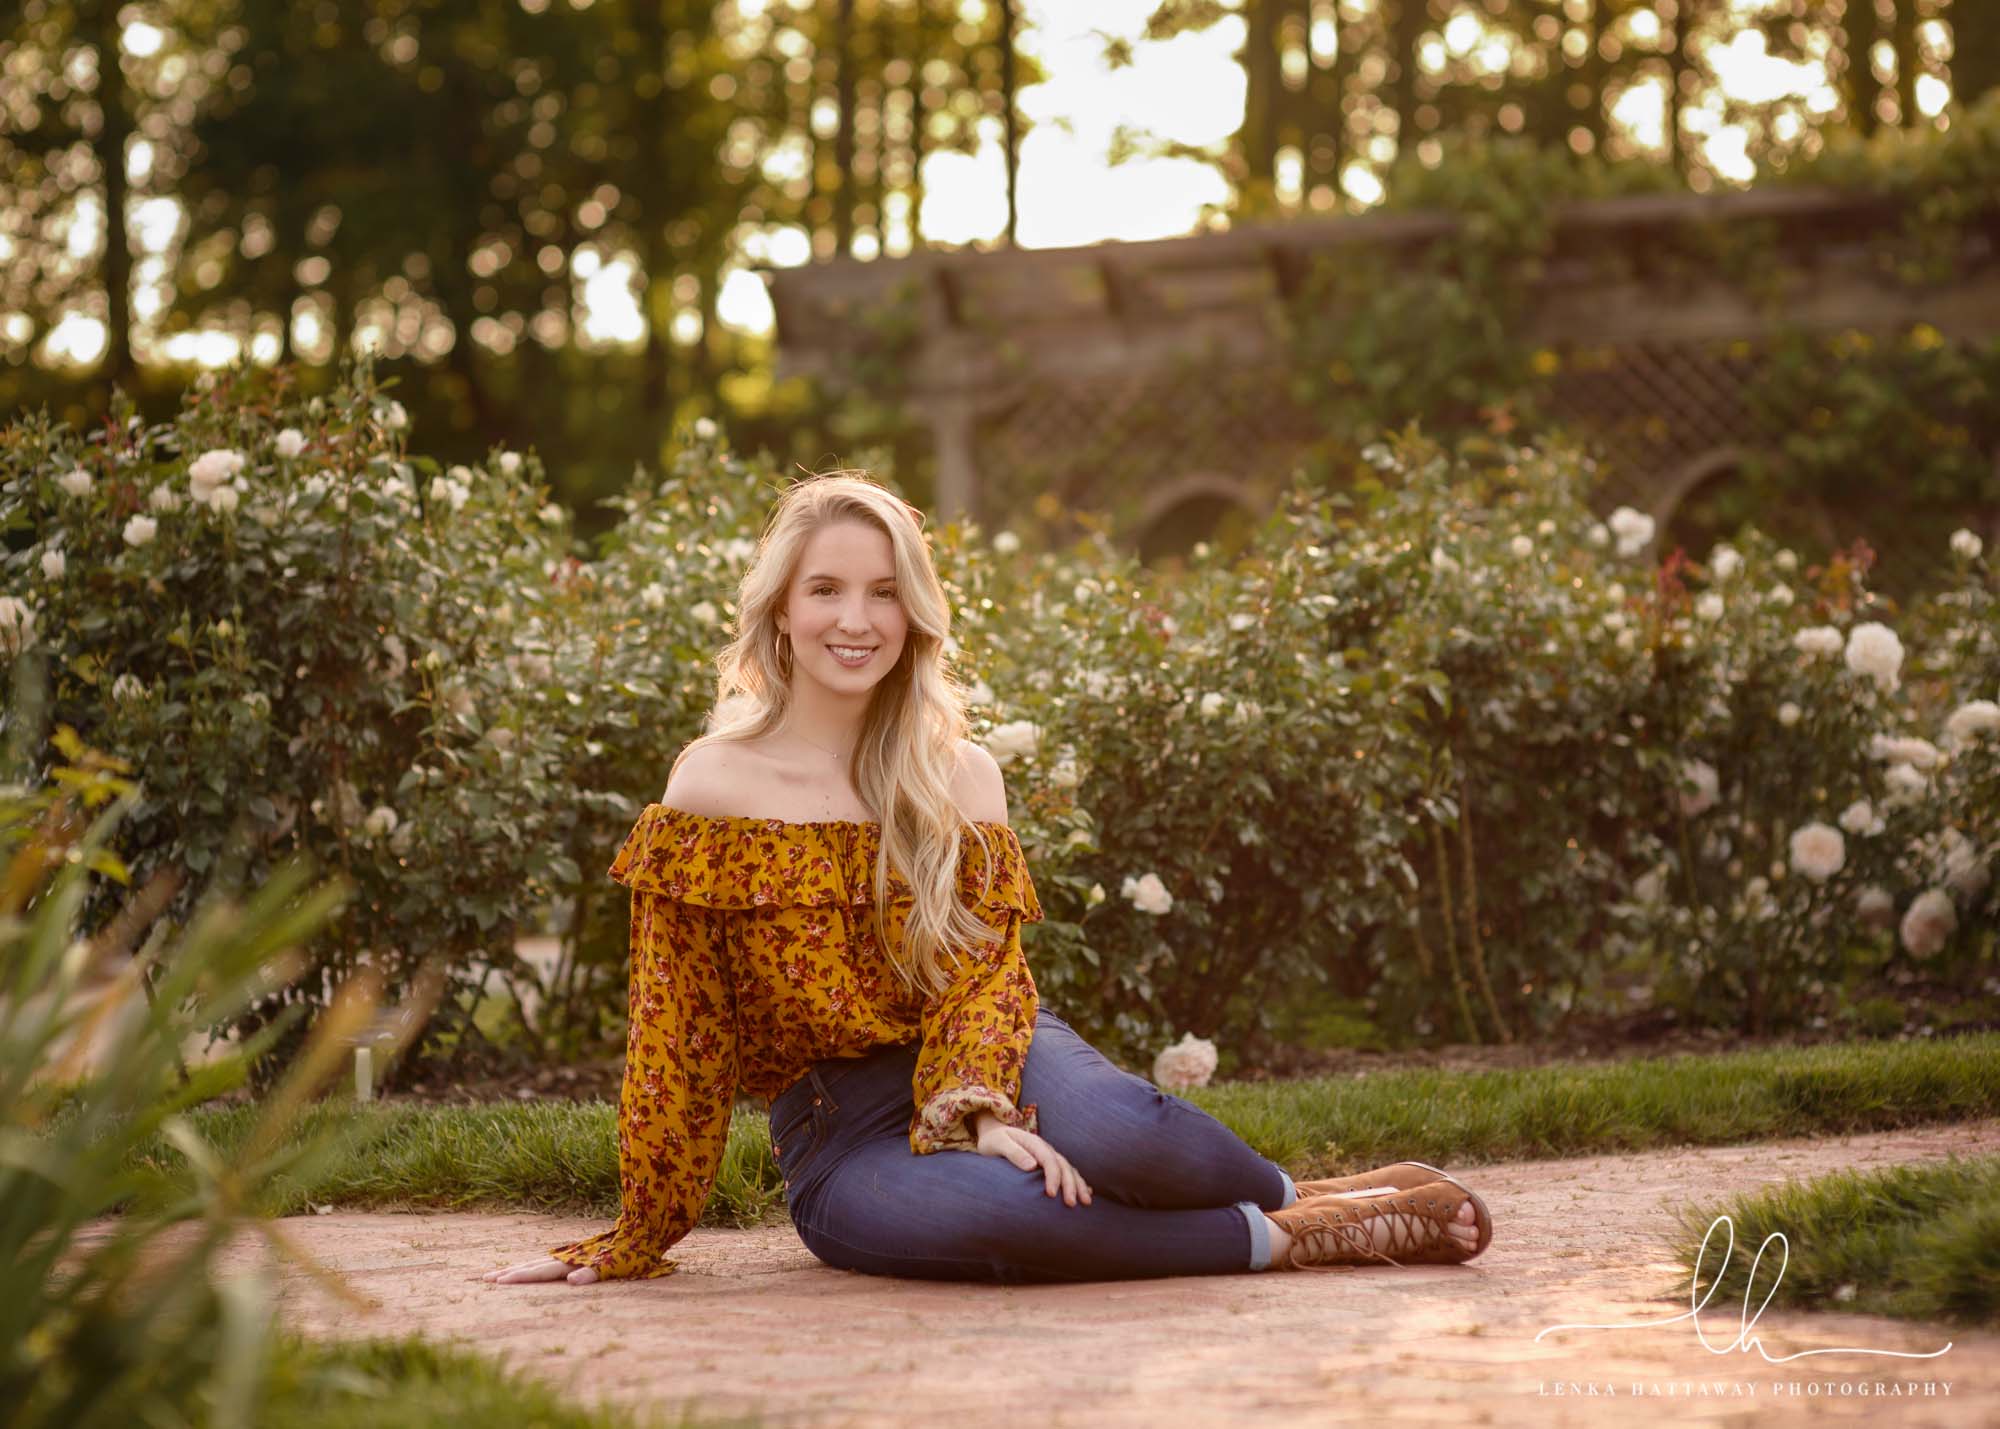 A girl in the gardens of the Biltmore during her senior photo session.